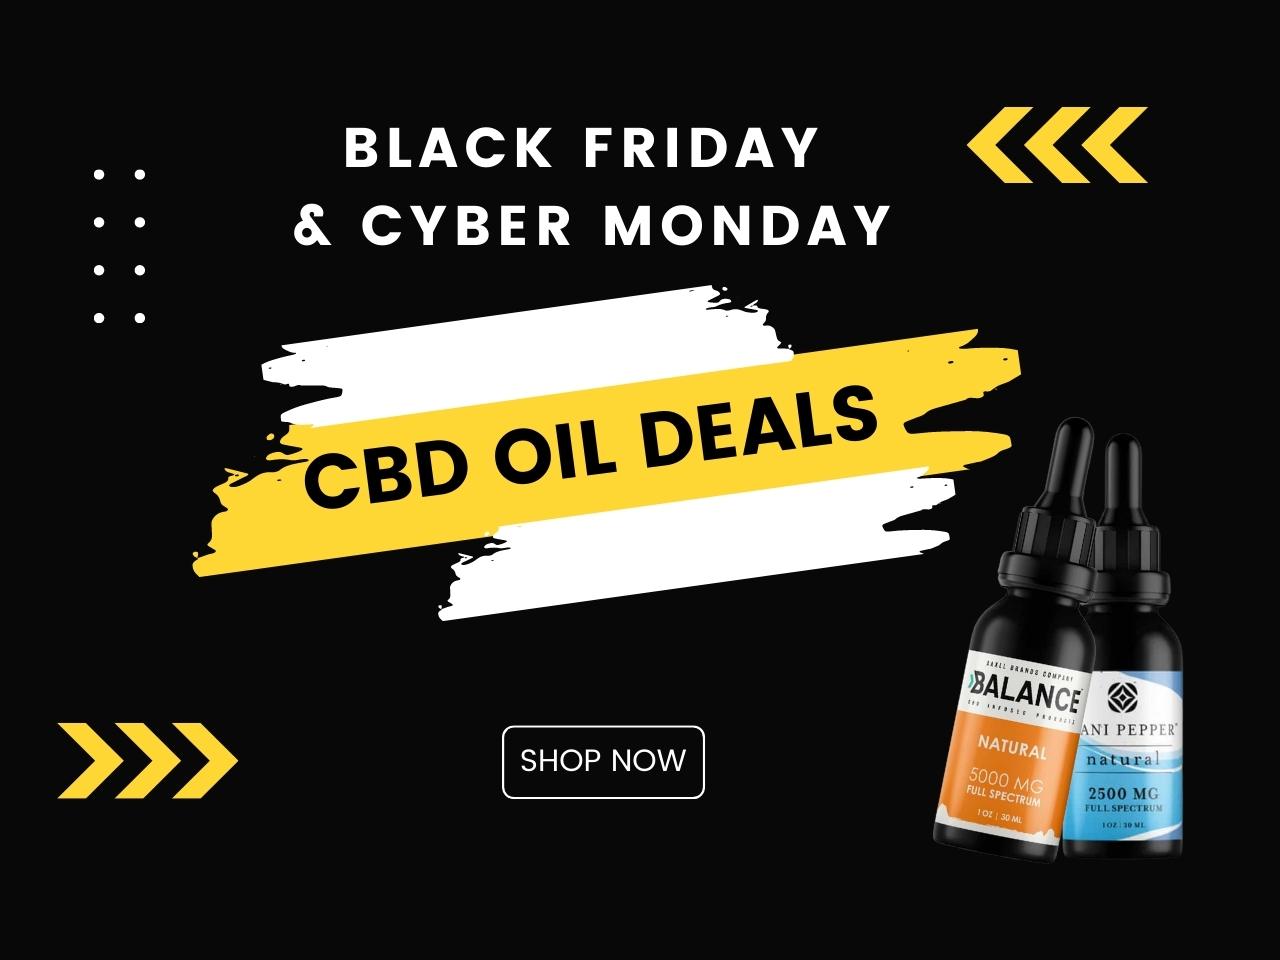 CBD Black Friday Sale: The Best CBD Product are Available Now